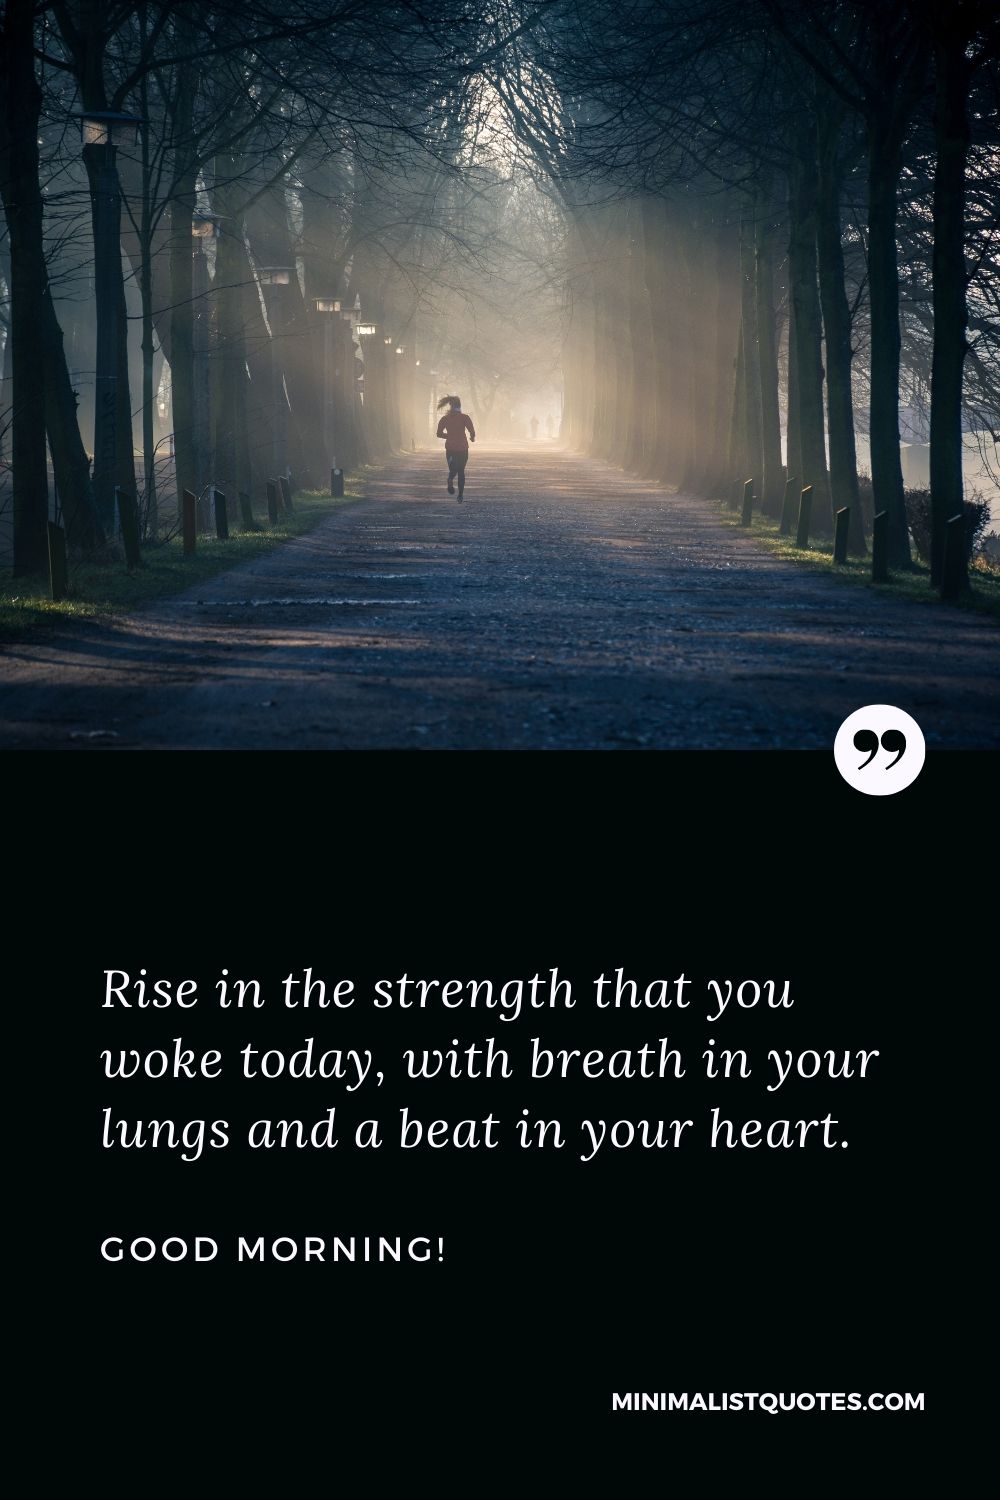 Good Morning Wish & Message With HD Image: Rise in the strength that you woke today, with breath in your lungs and a beat in your heart.